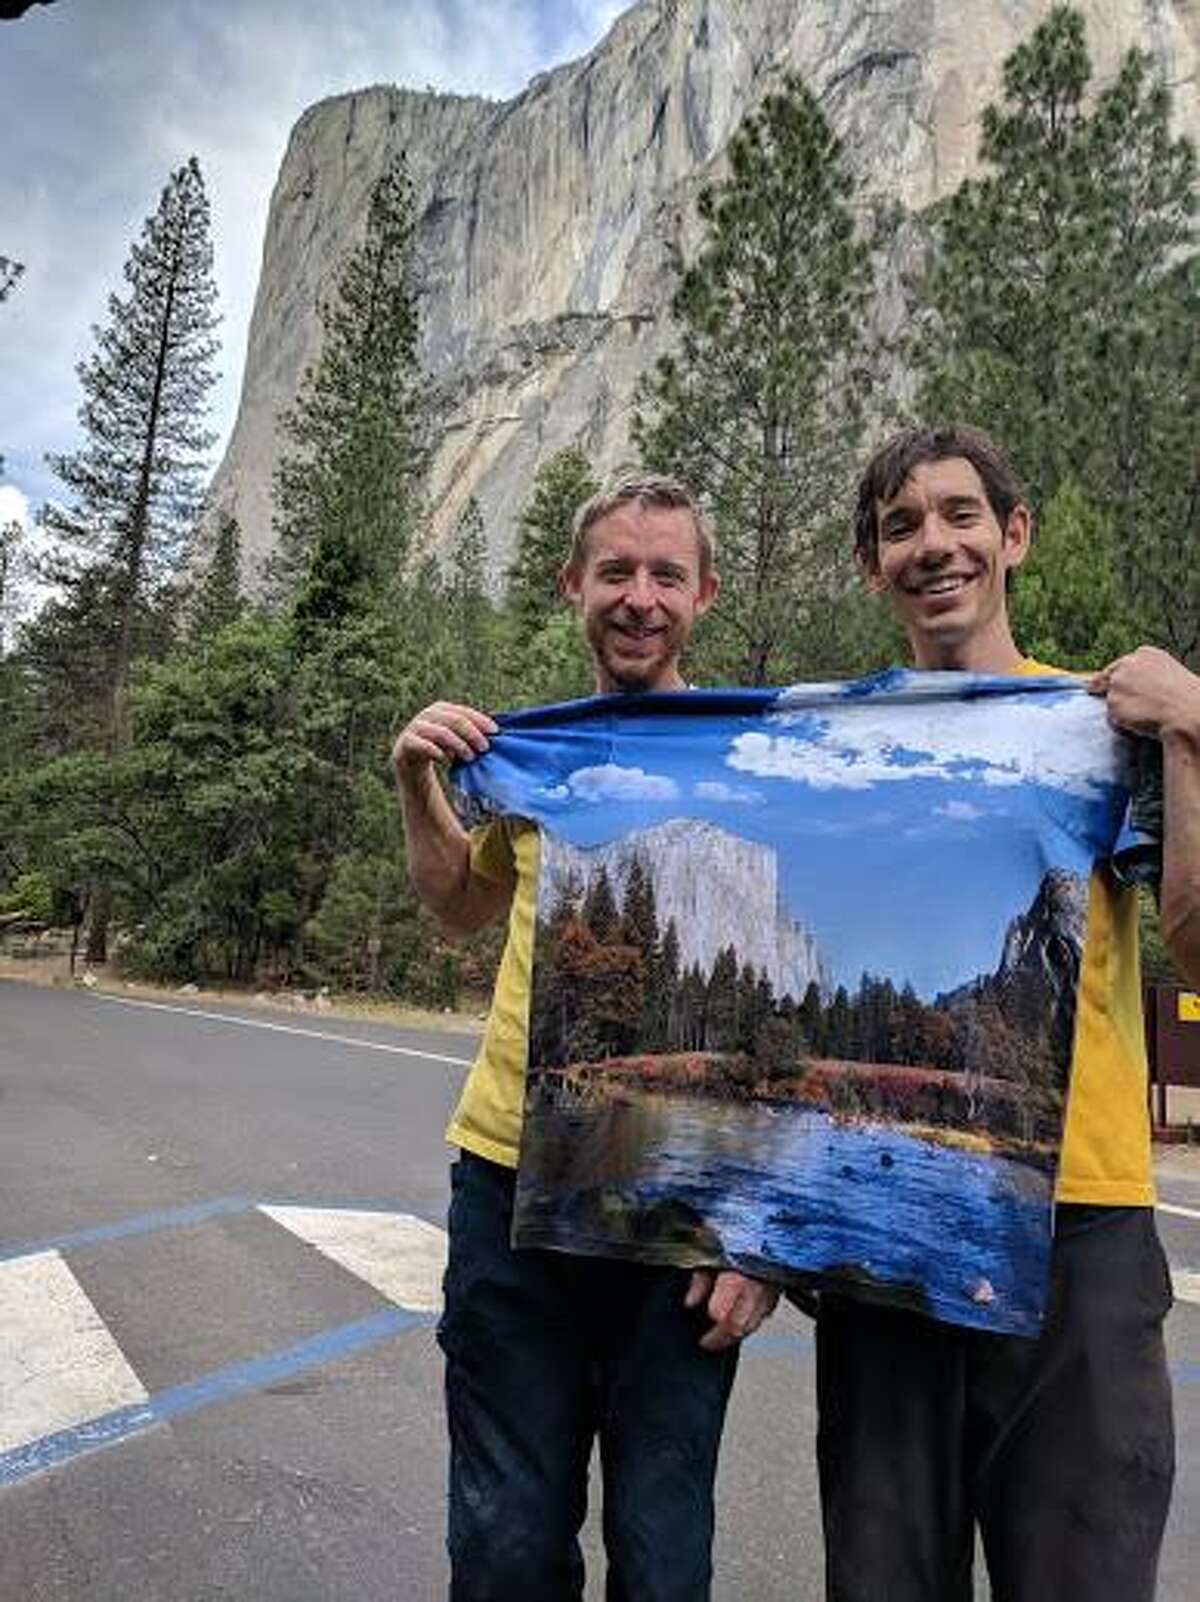 Tommy Caldwell and Alex Honnold hold a t-shirt with an image of the mountain they just climbed as they celebrate their record on the Nose route of El Capitan.